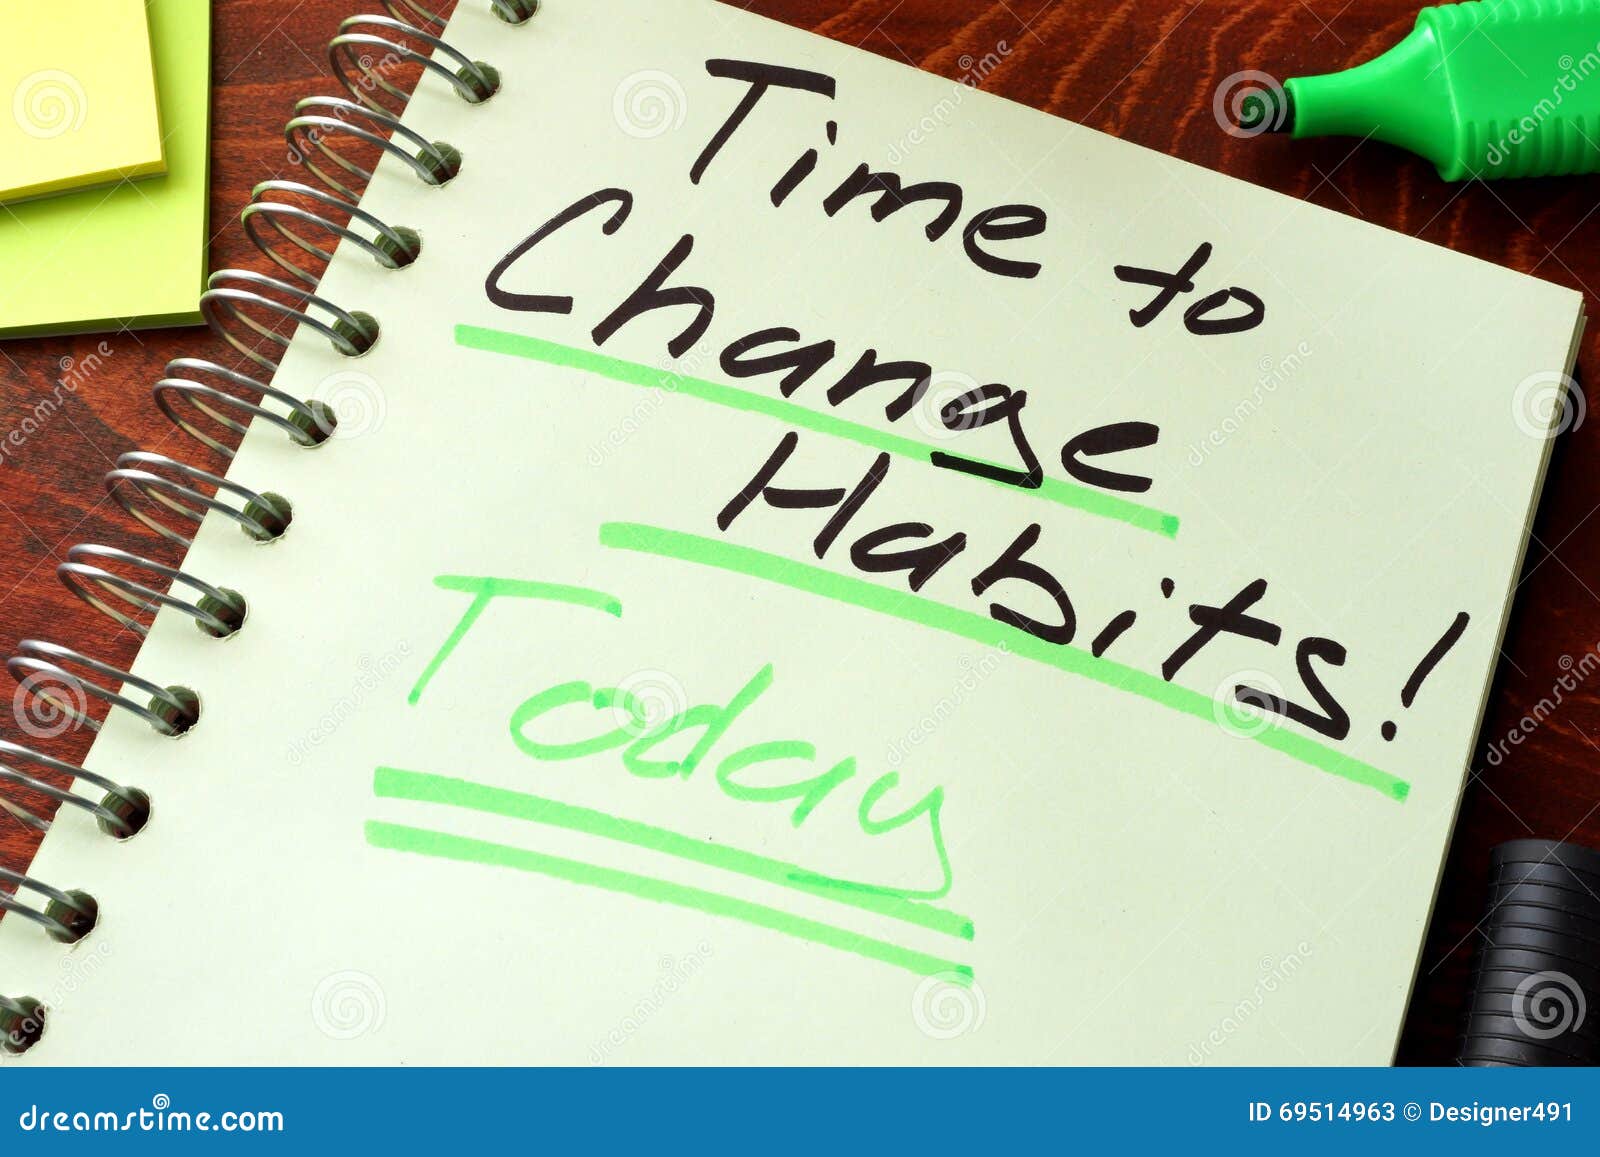 time to change habits today written on a notepad.